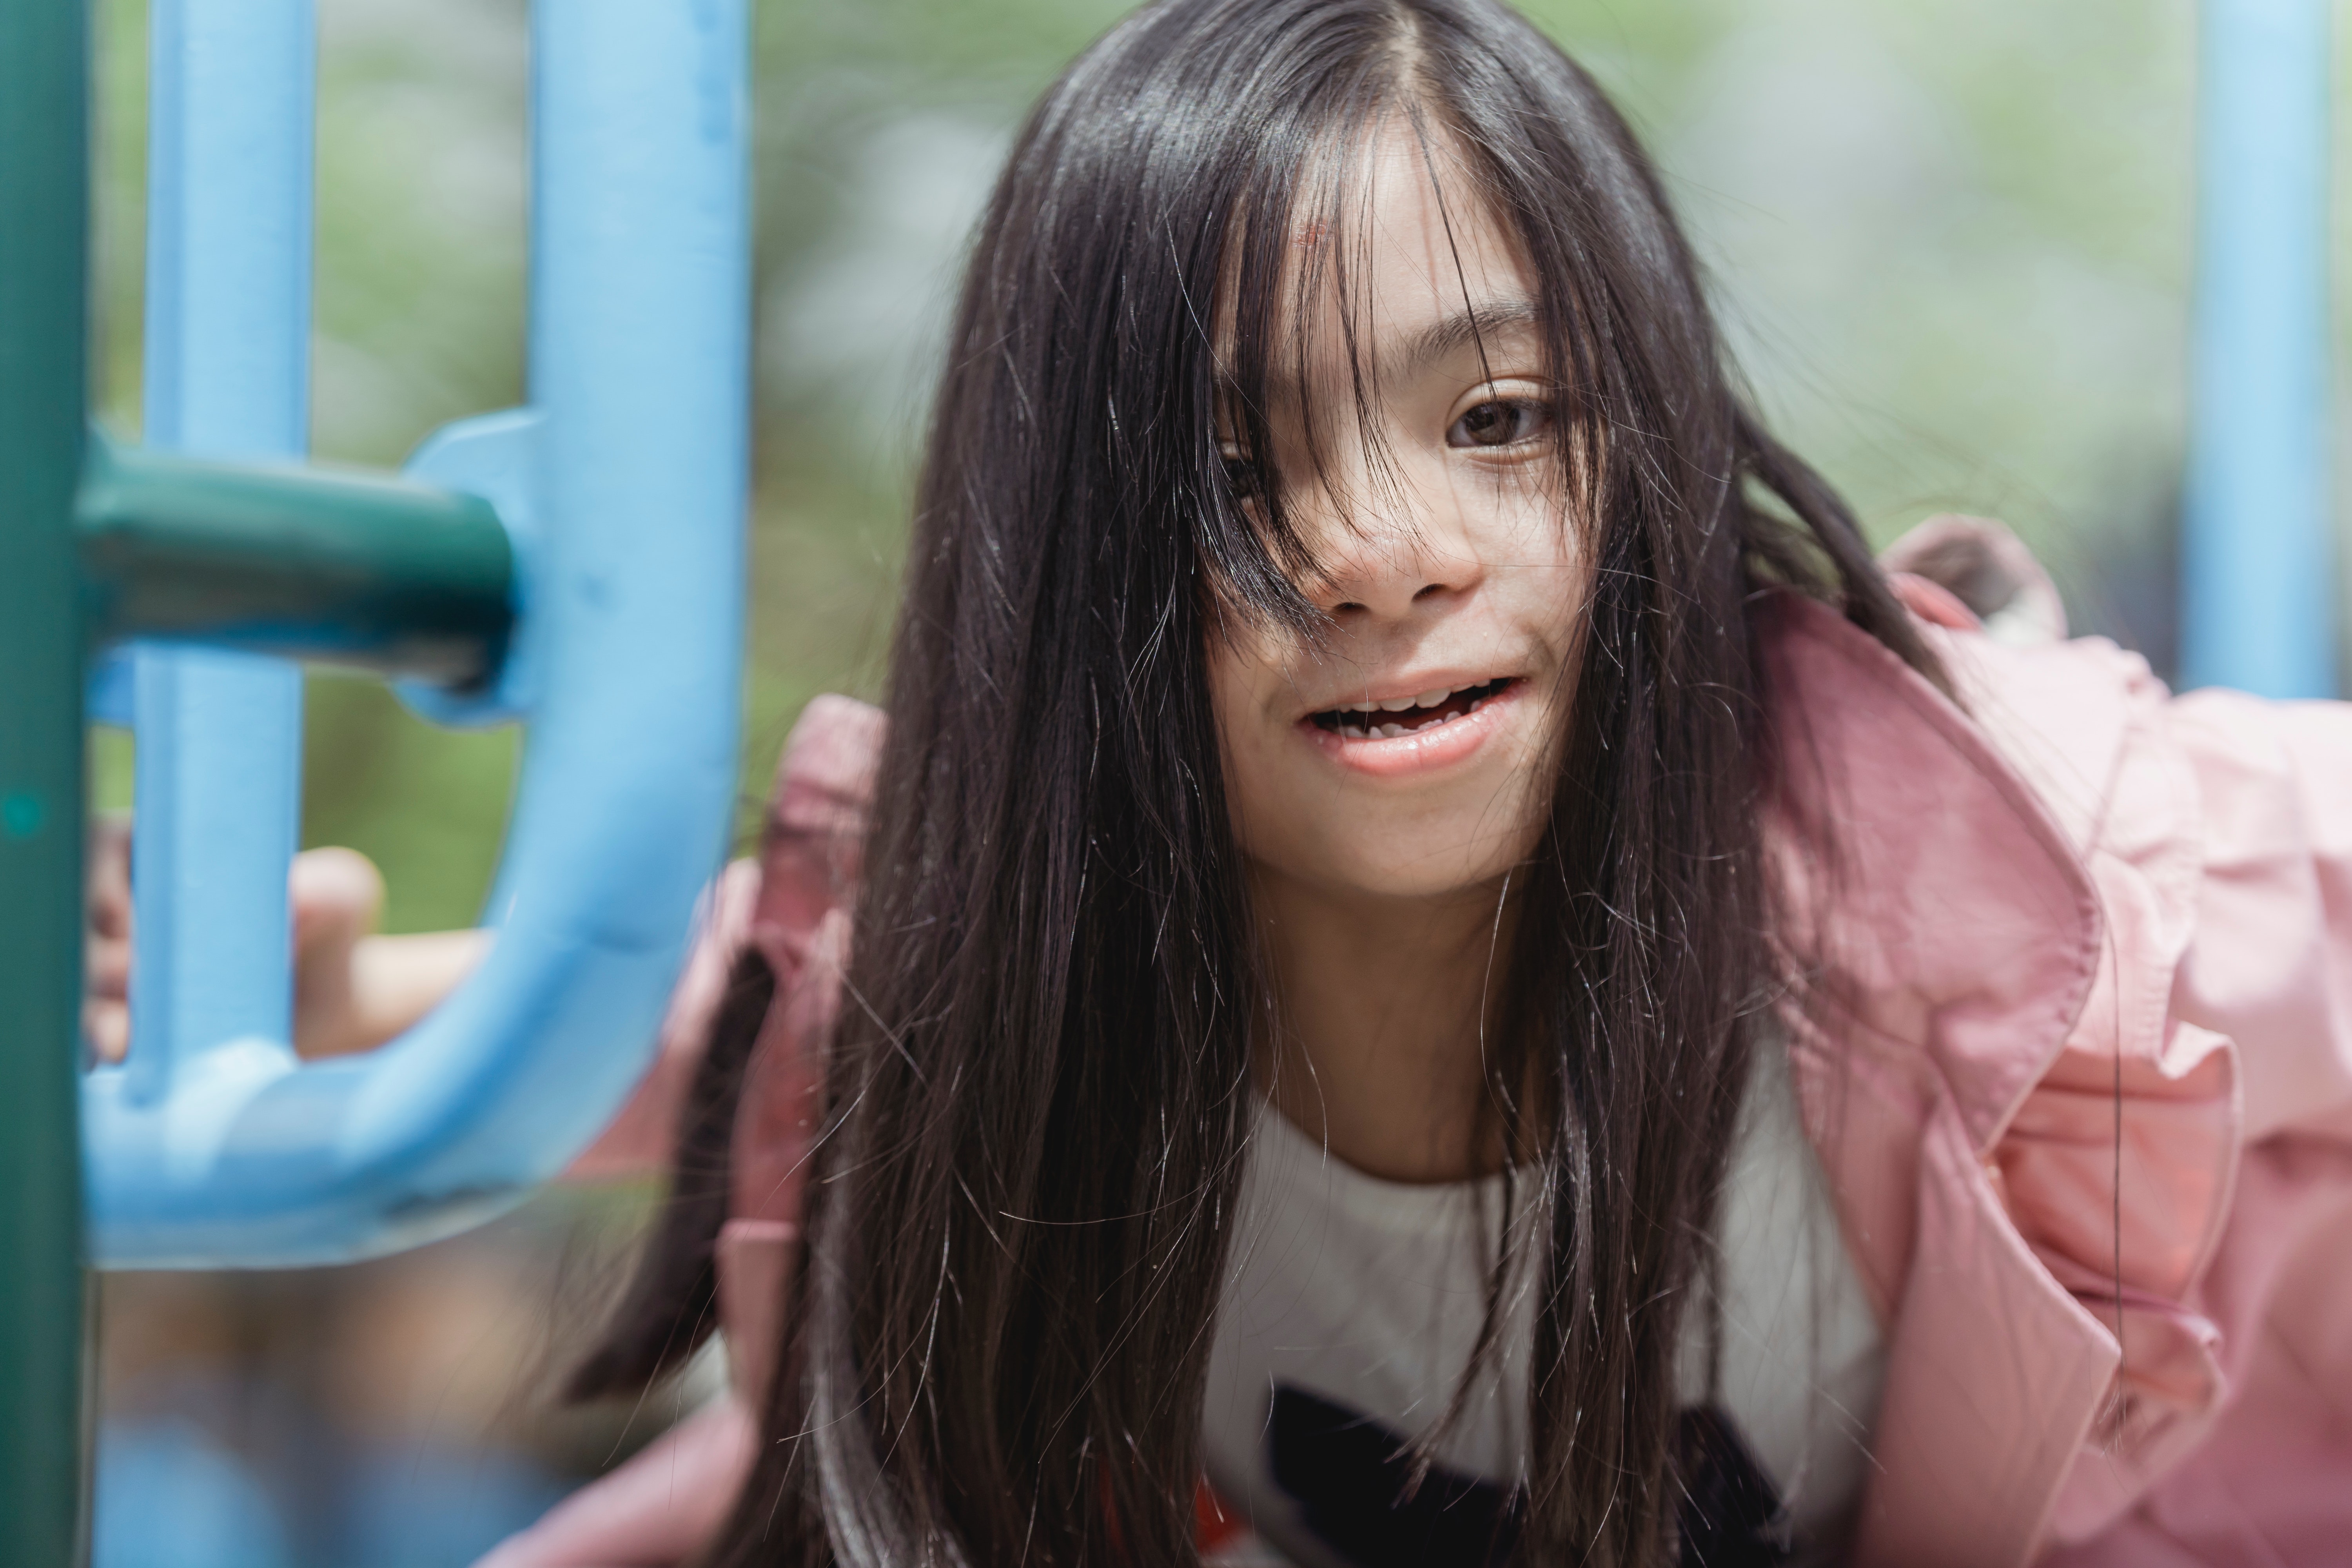 A child with long dark hair, medium-tan skin, and a pink jacket happily plays on playground equipment.